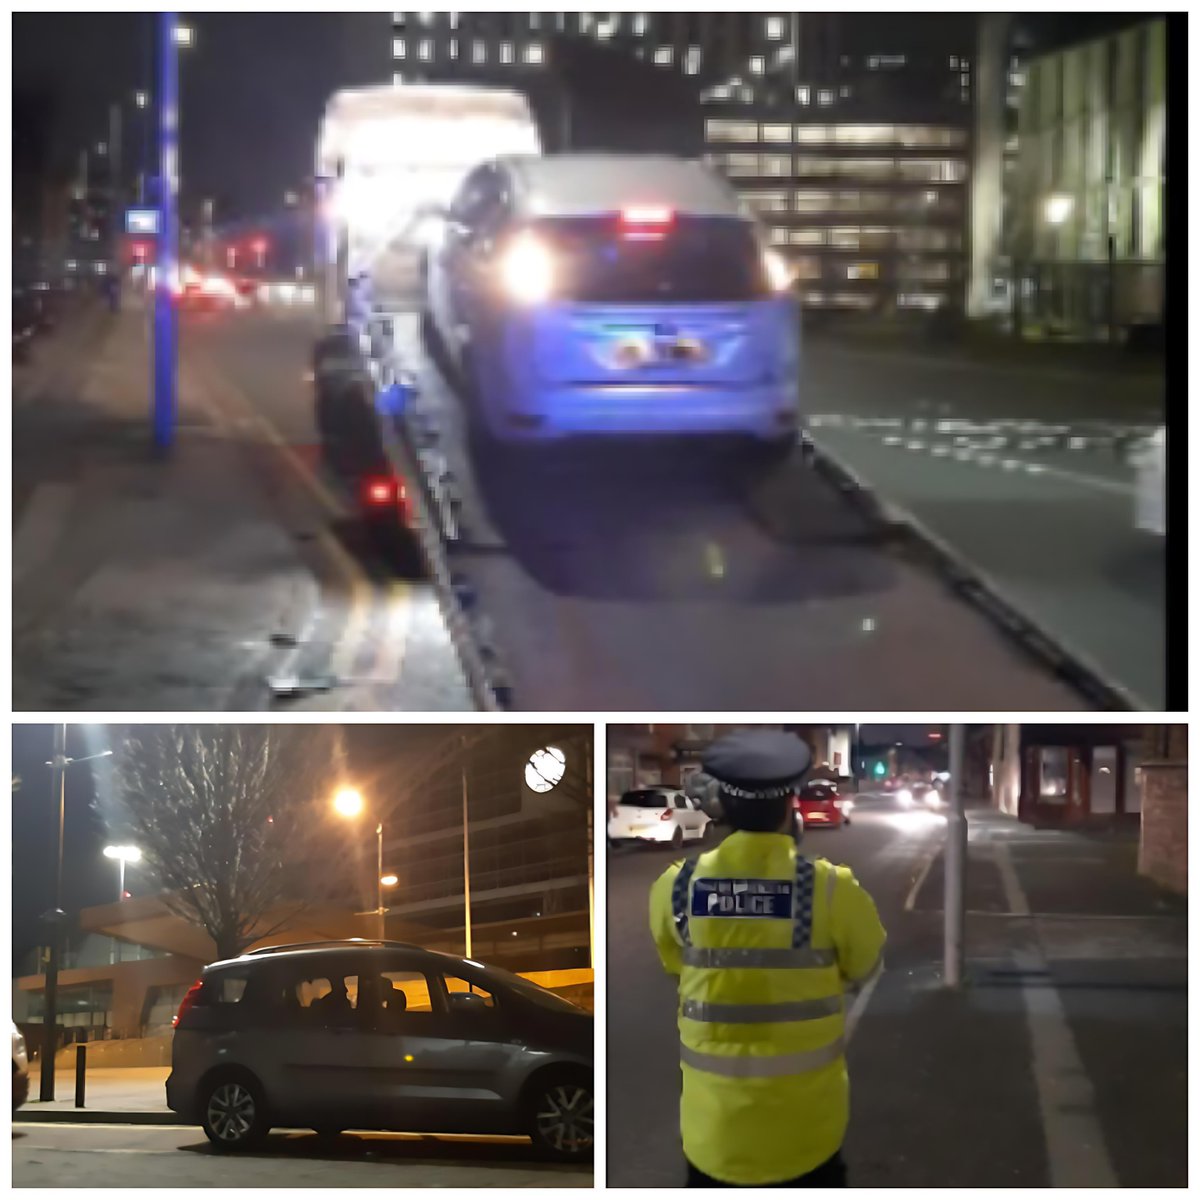 Another two cars were seized last night from uninsured / unlicensed drivers by our @GMPSpecials in @GMPCityCentre & @GMPLongsight on their way back from speed enforcement activity on #YewTreeRoad G.